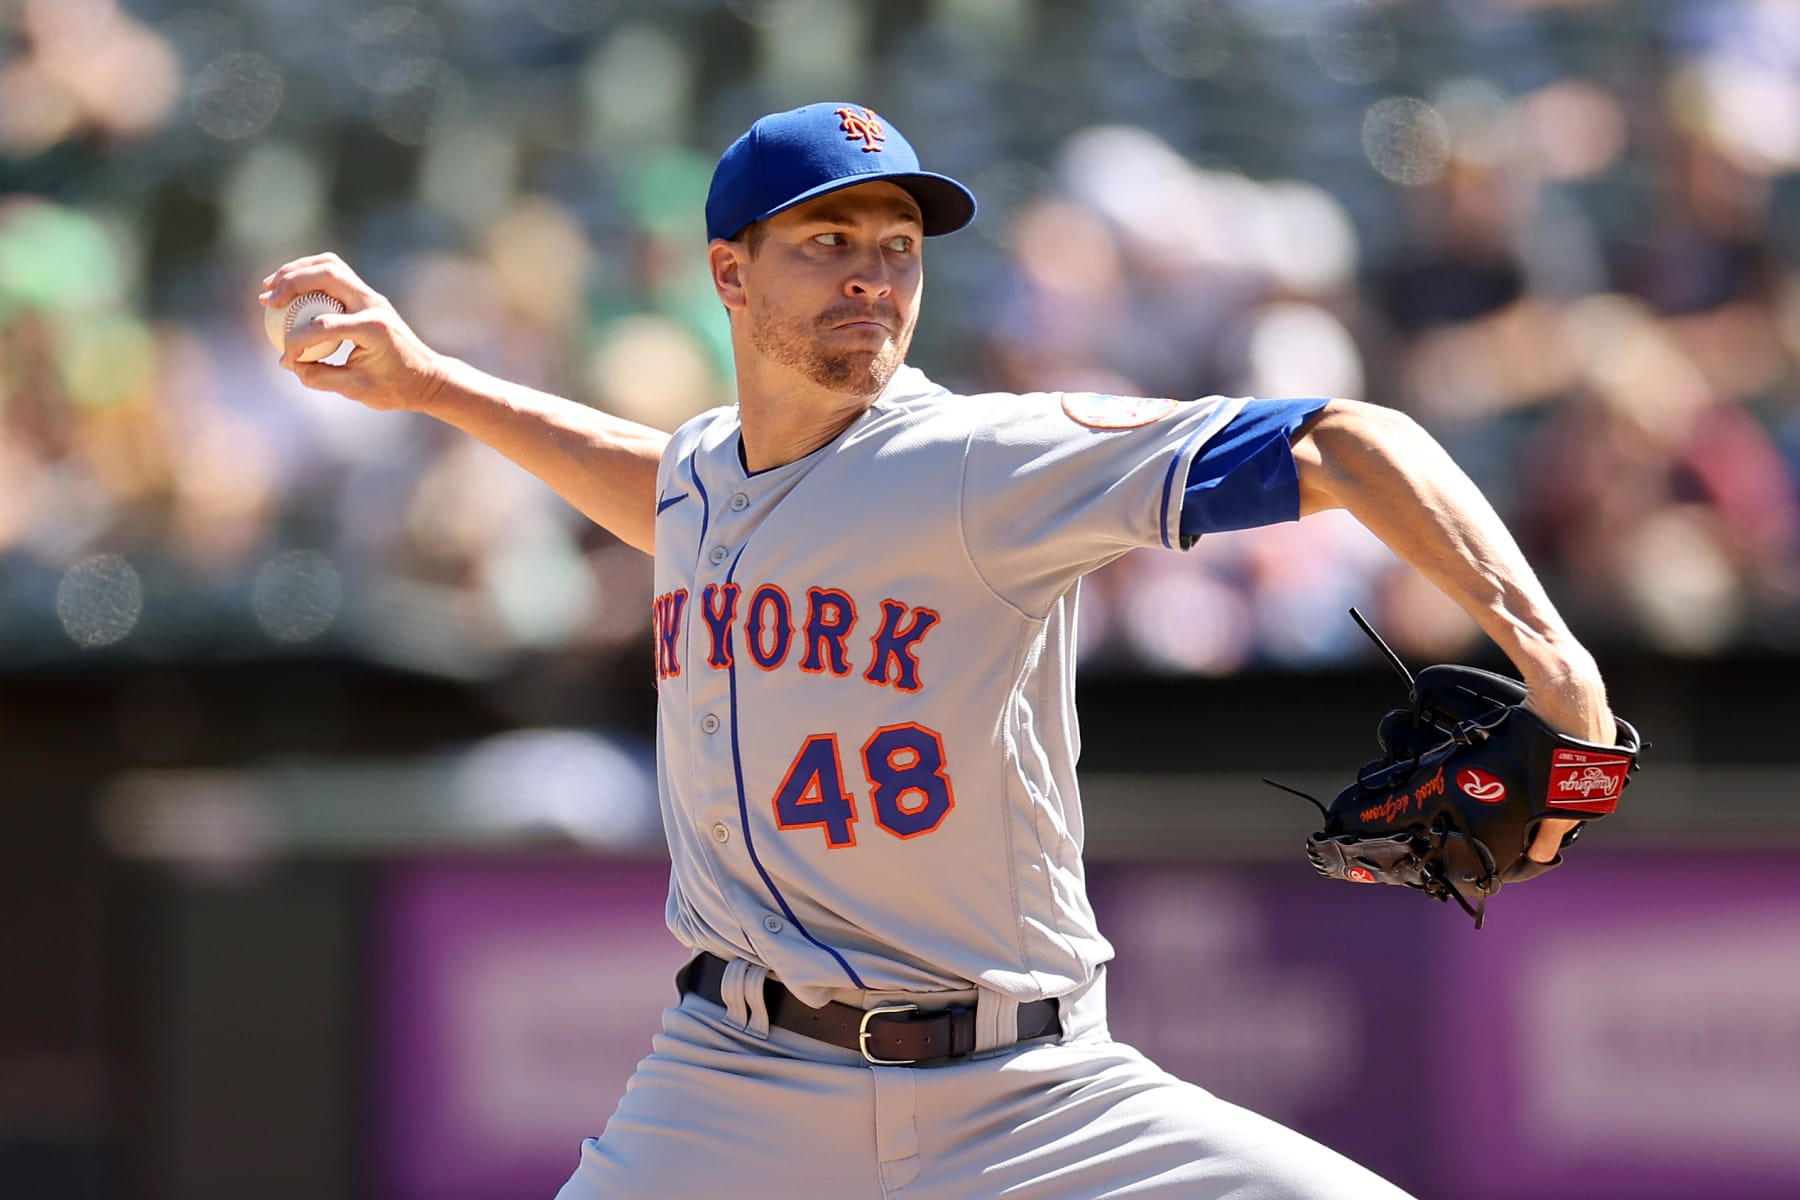 Mets have clearly given up with latest lineup vs. rival Braves